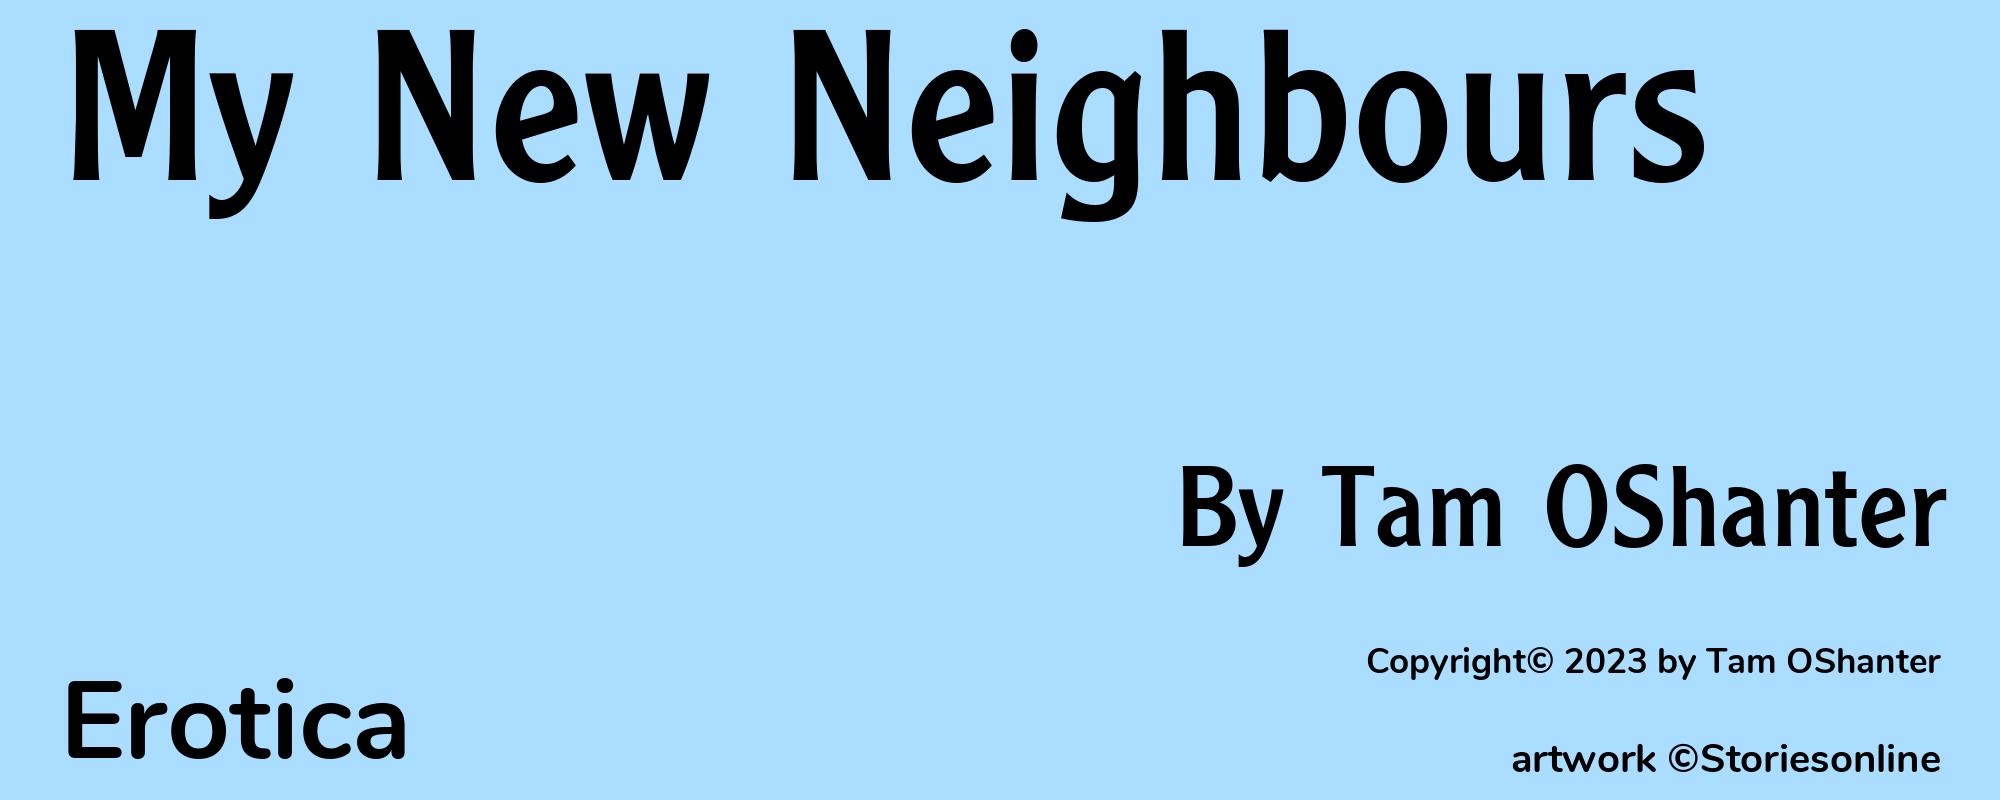 My New Neighbours - Cover